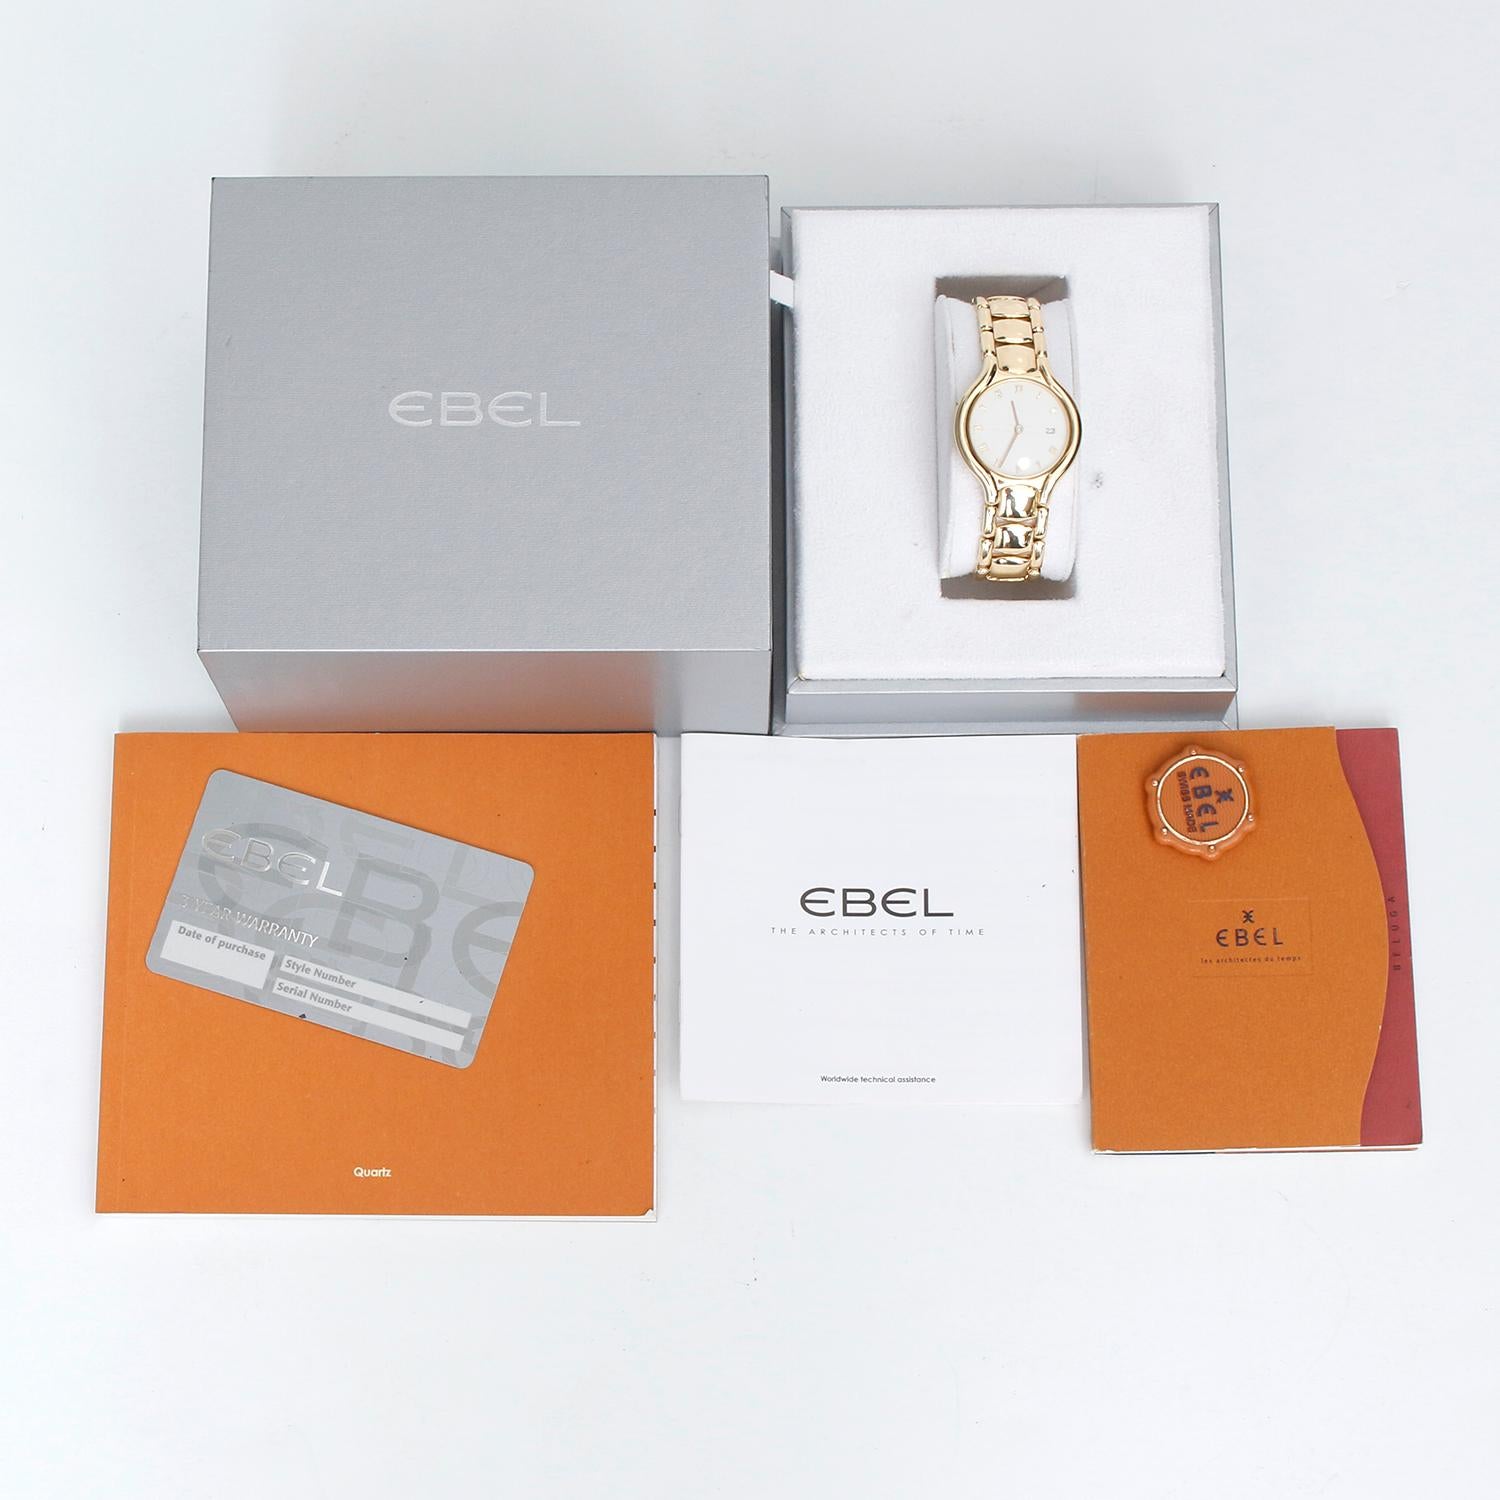 Ebel Beluga 18k Yellow Gold Men's/Ladies 32mm Midsize Quartz Watch 884960 - Quartz movement. 18k yellow gold case (32mm diameter). Ivory colored dial with gold Roman numerals; date at 3 o'clock position. 18k yellow gold bracelet; will fit a 6 1/2